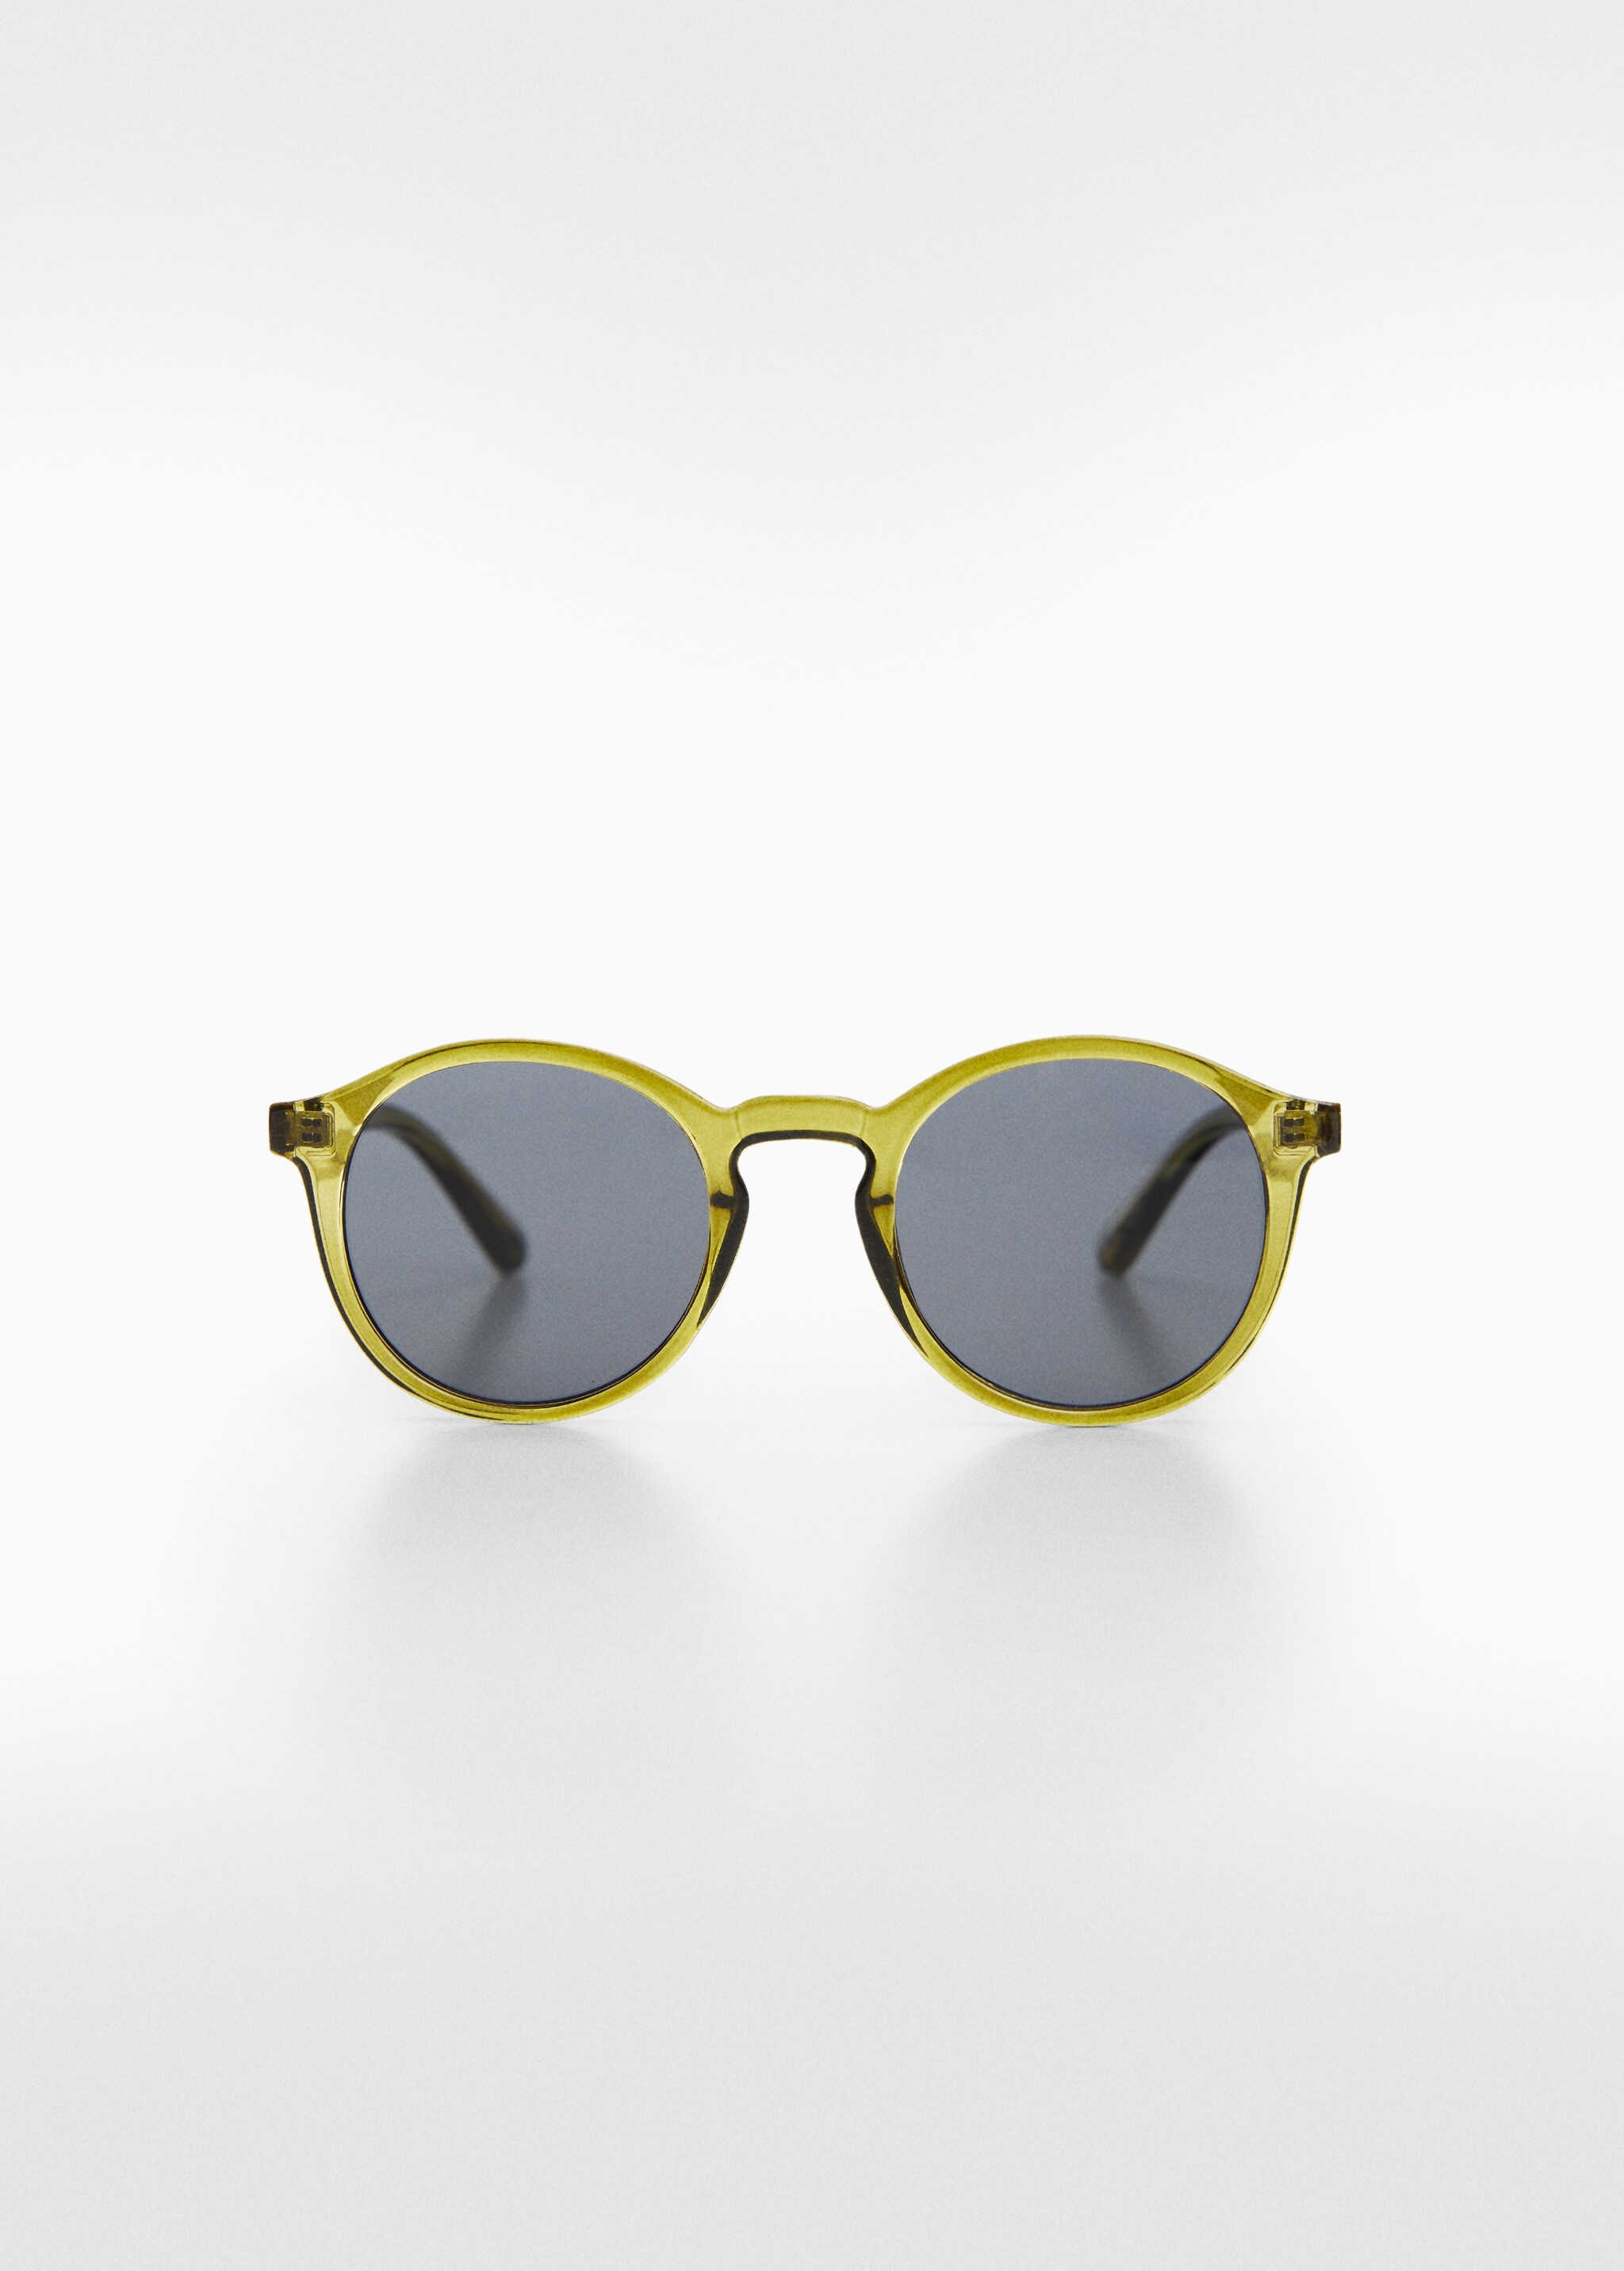 Rounded sunglasses - Article without model